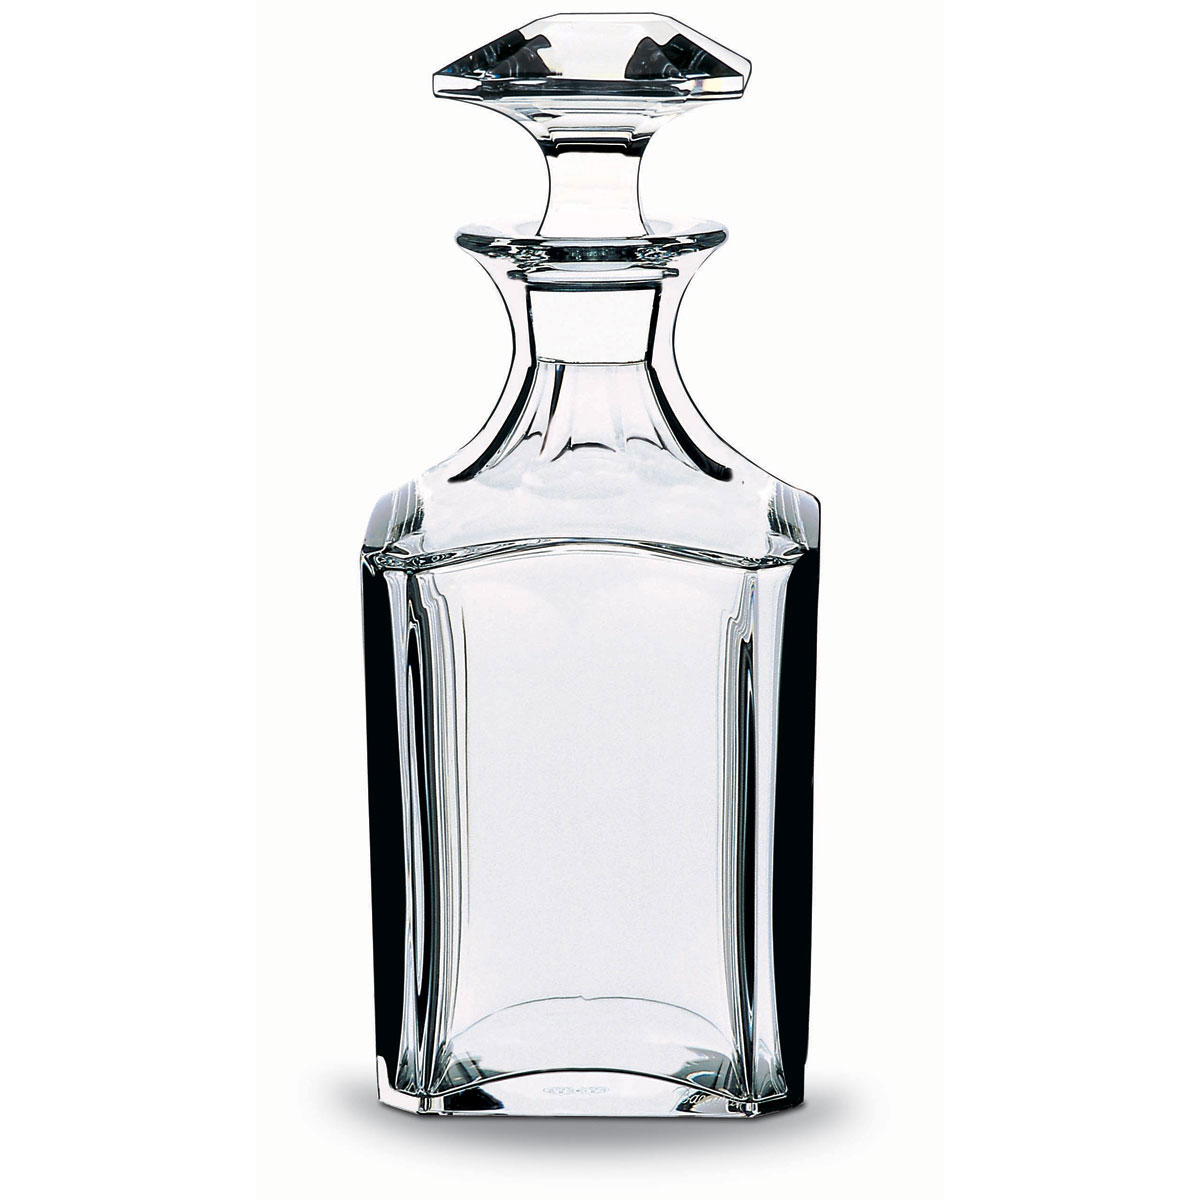 Baccarat Crystal, Perfection Square Plain Crystal Decanter